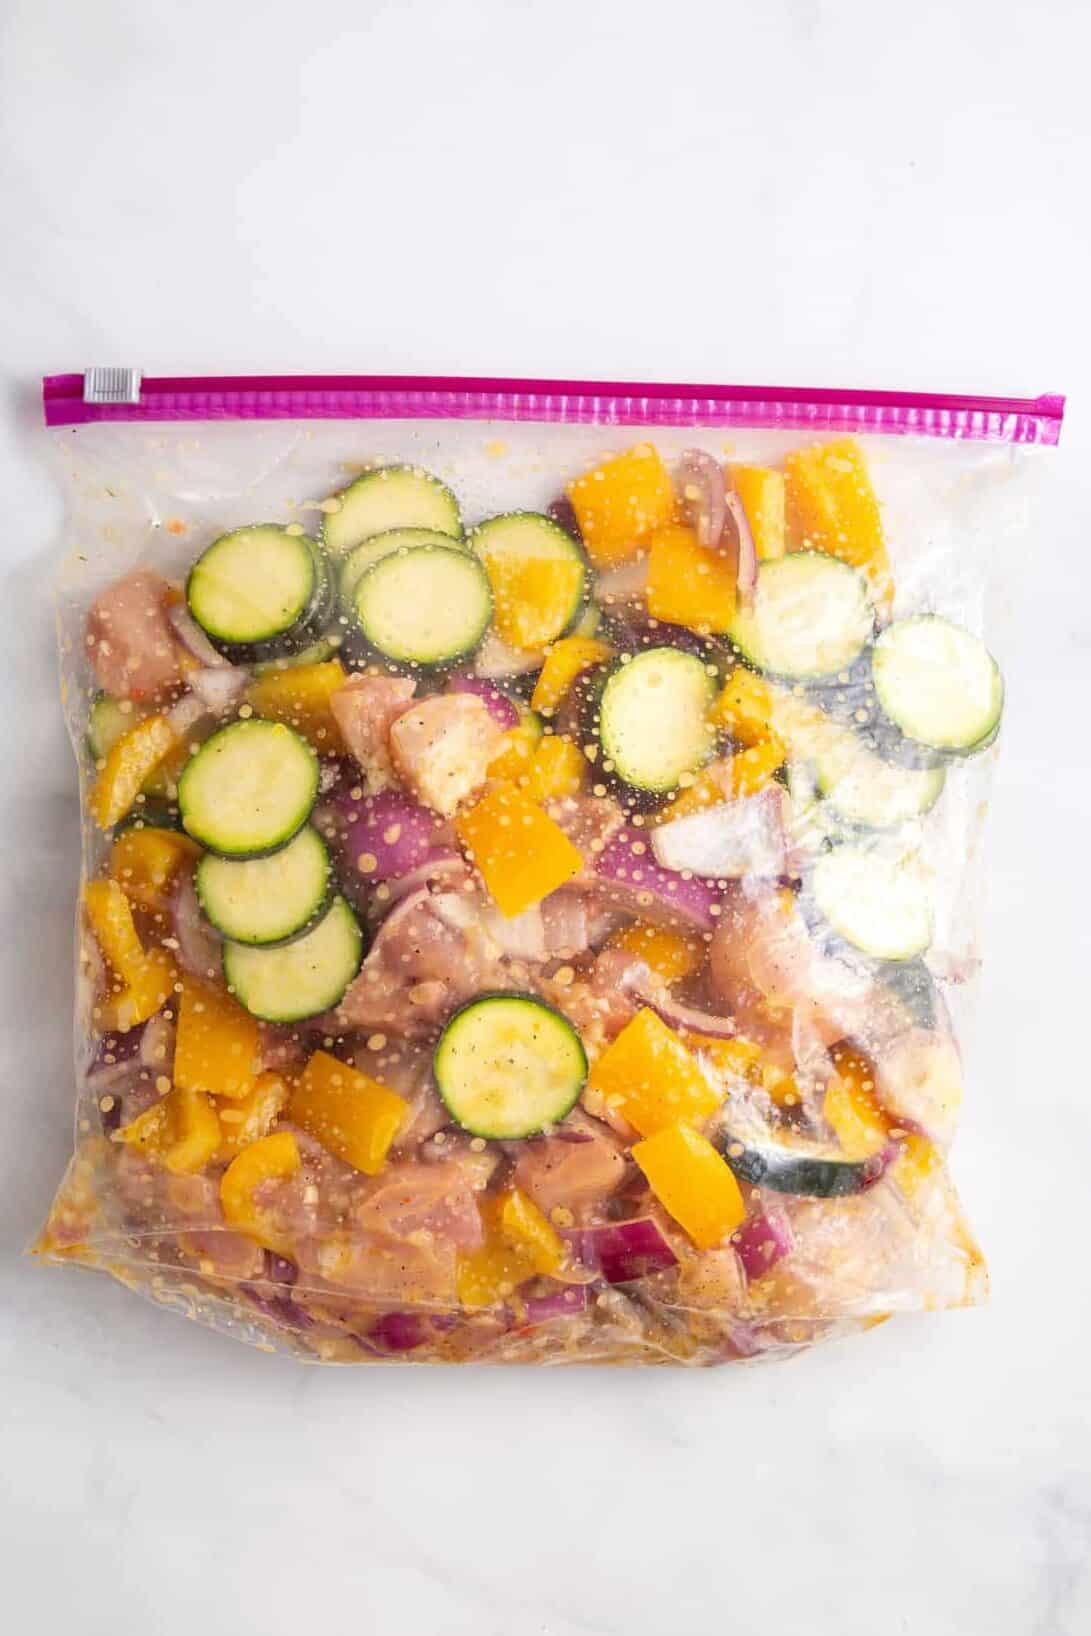 cubed chicken and cut summer vegetables in a ziploc bag with seasonings and italian dressing marinade